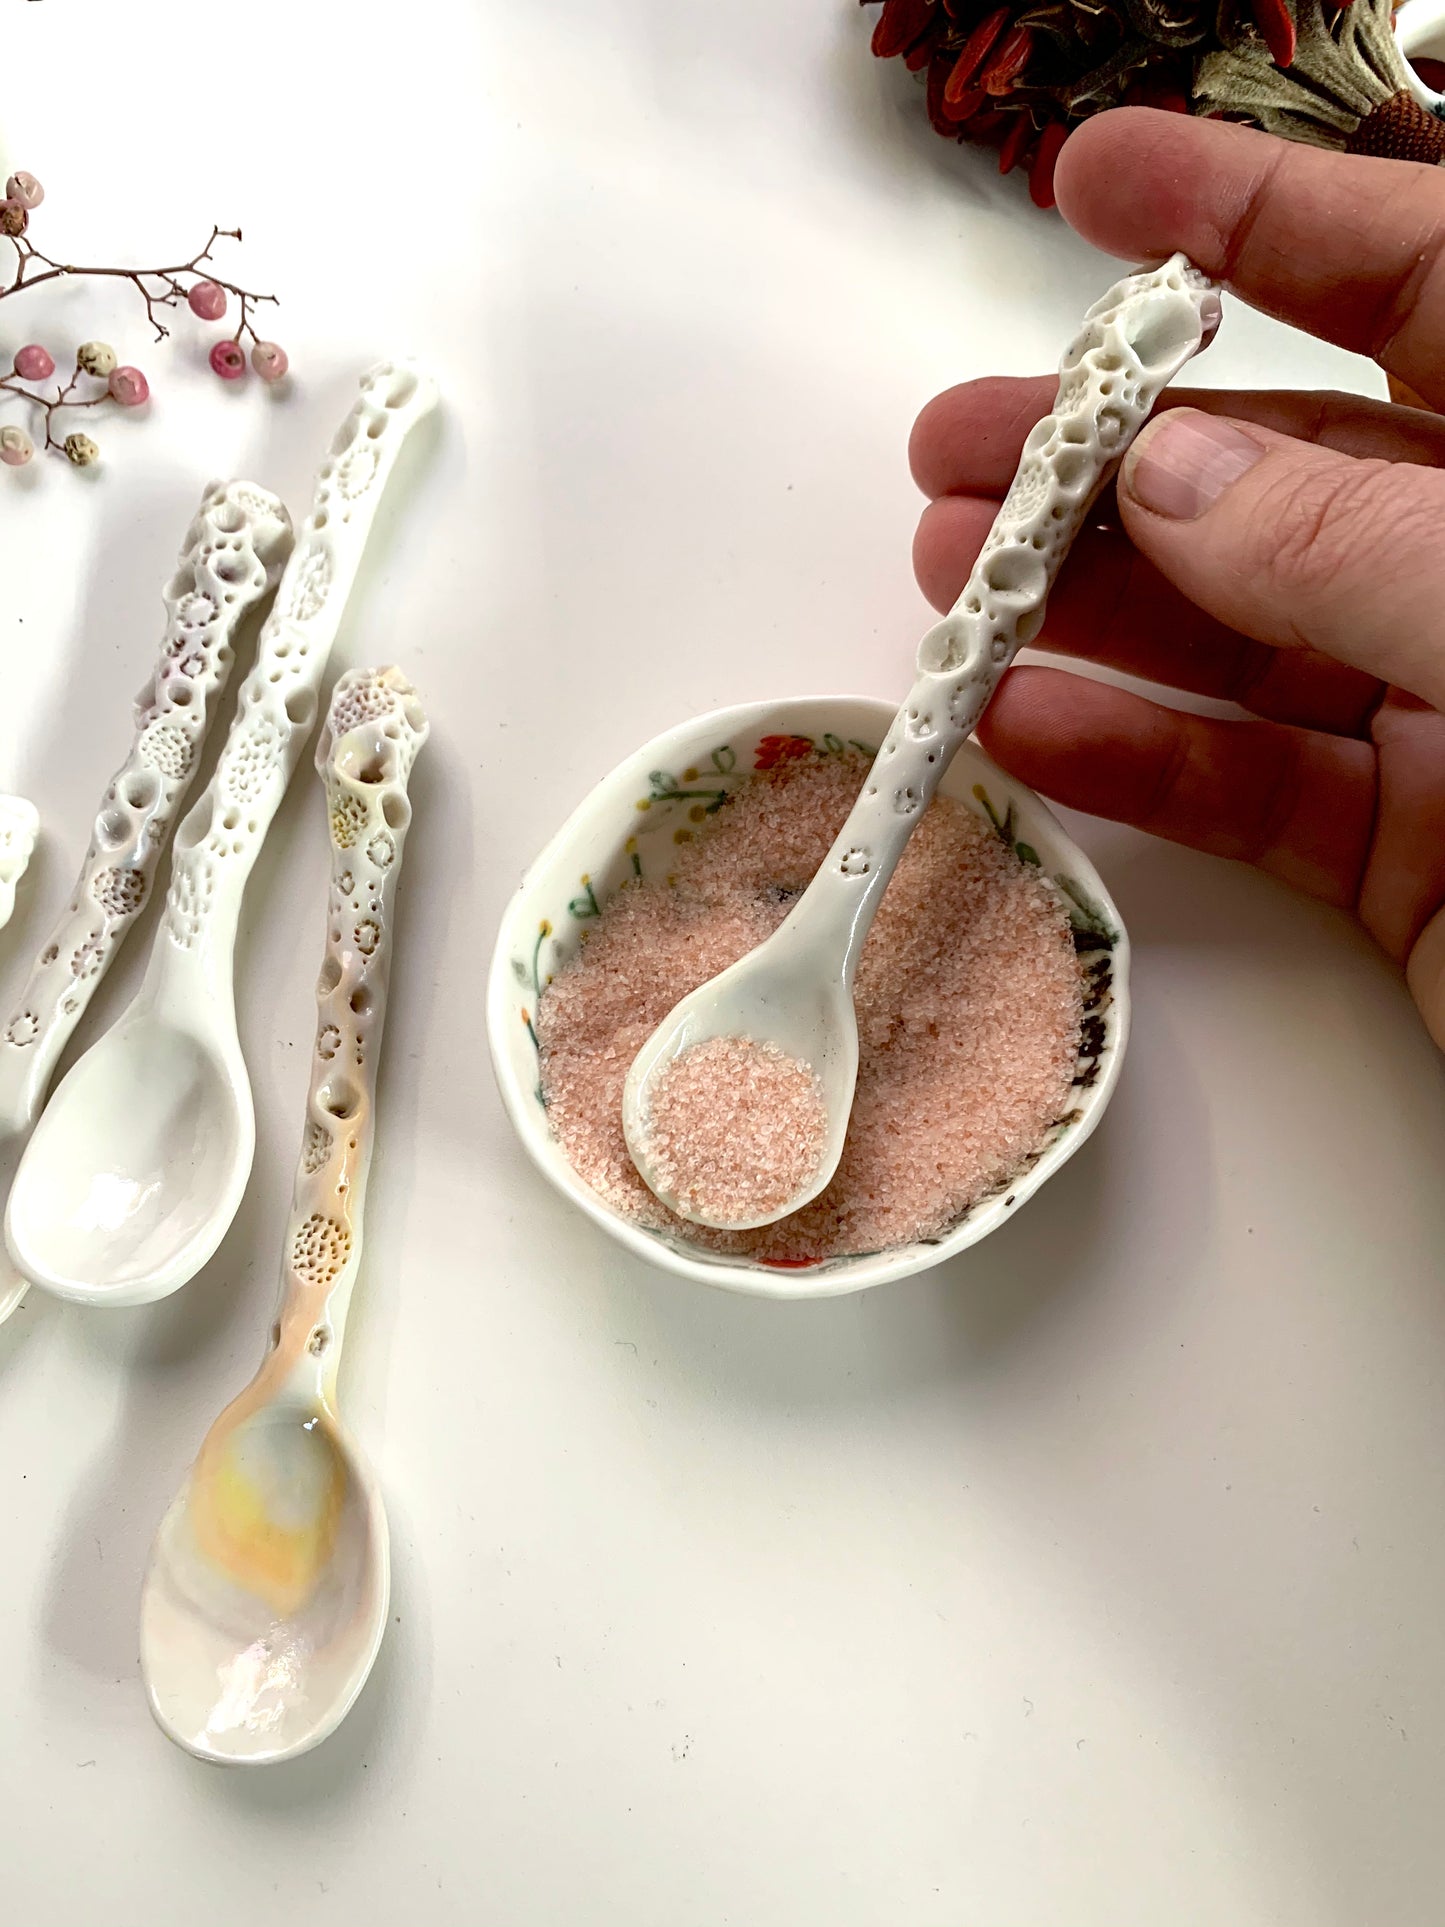 One Porcelain hand formed ‘coral’ spoon